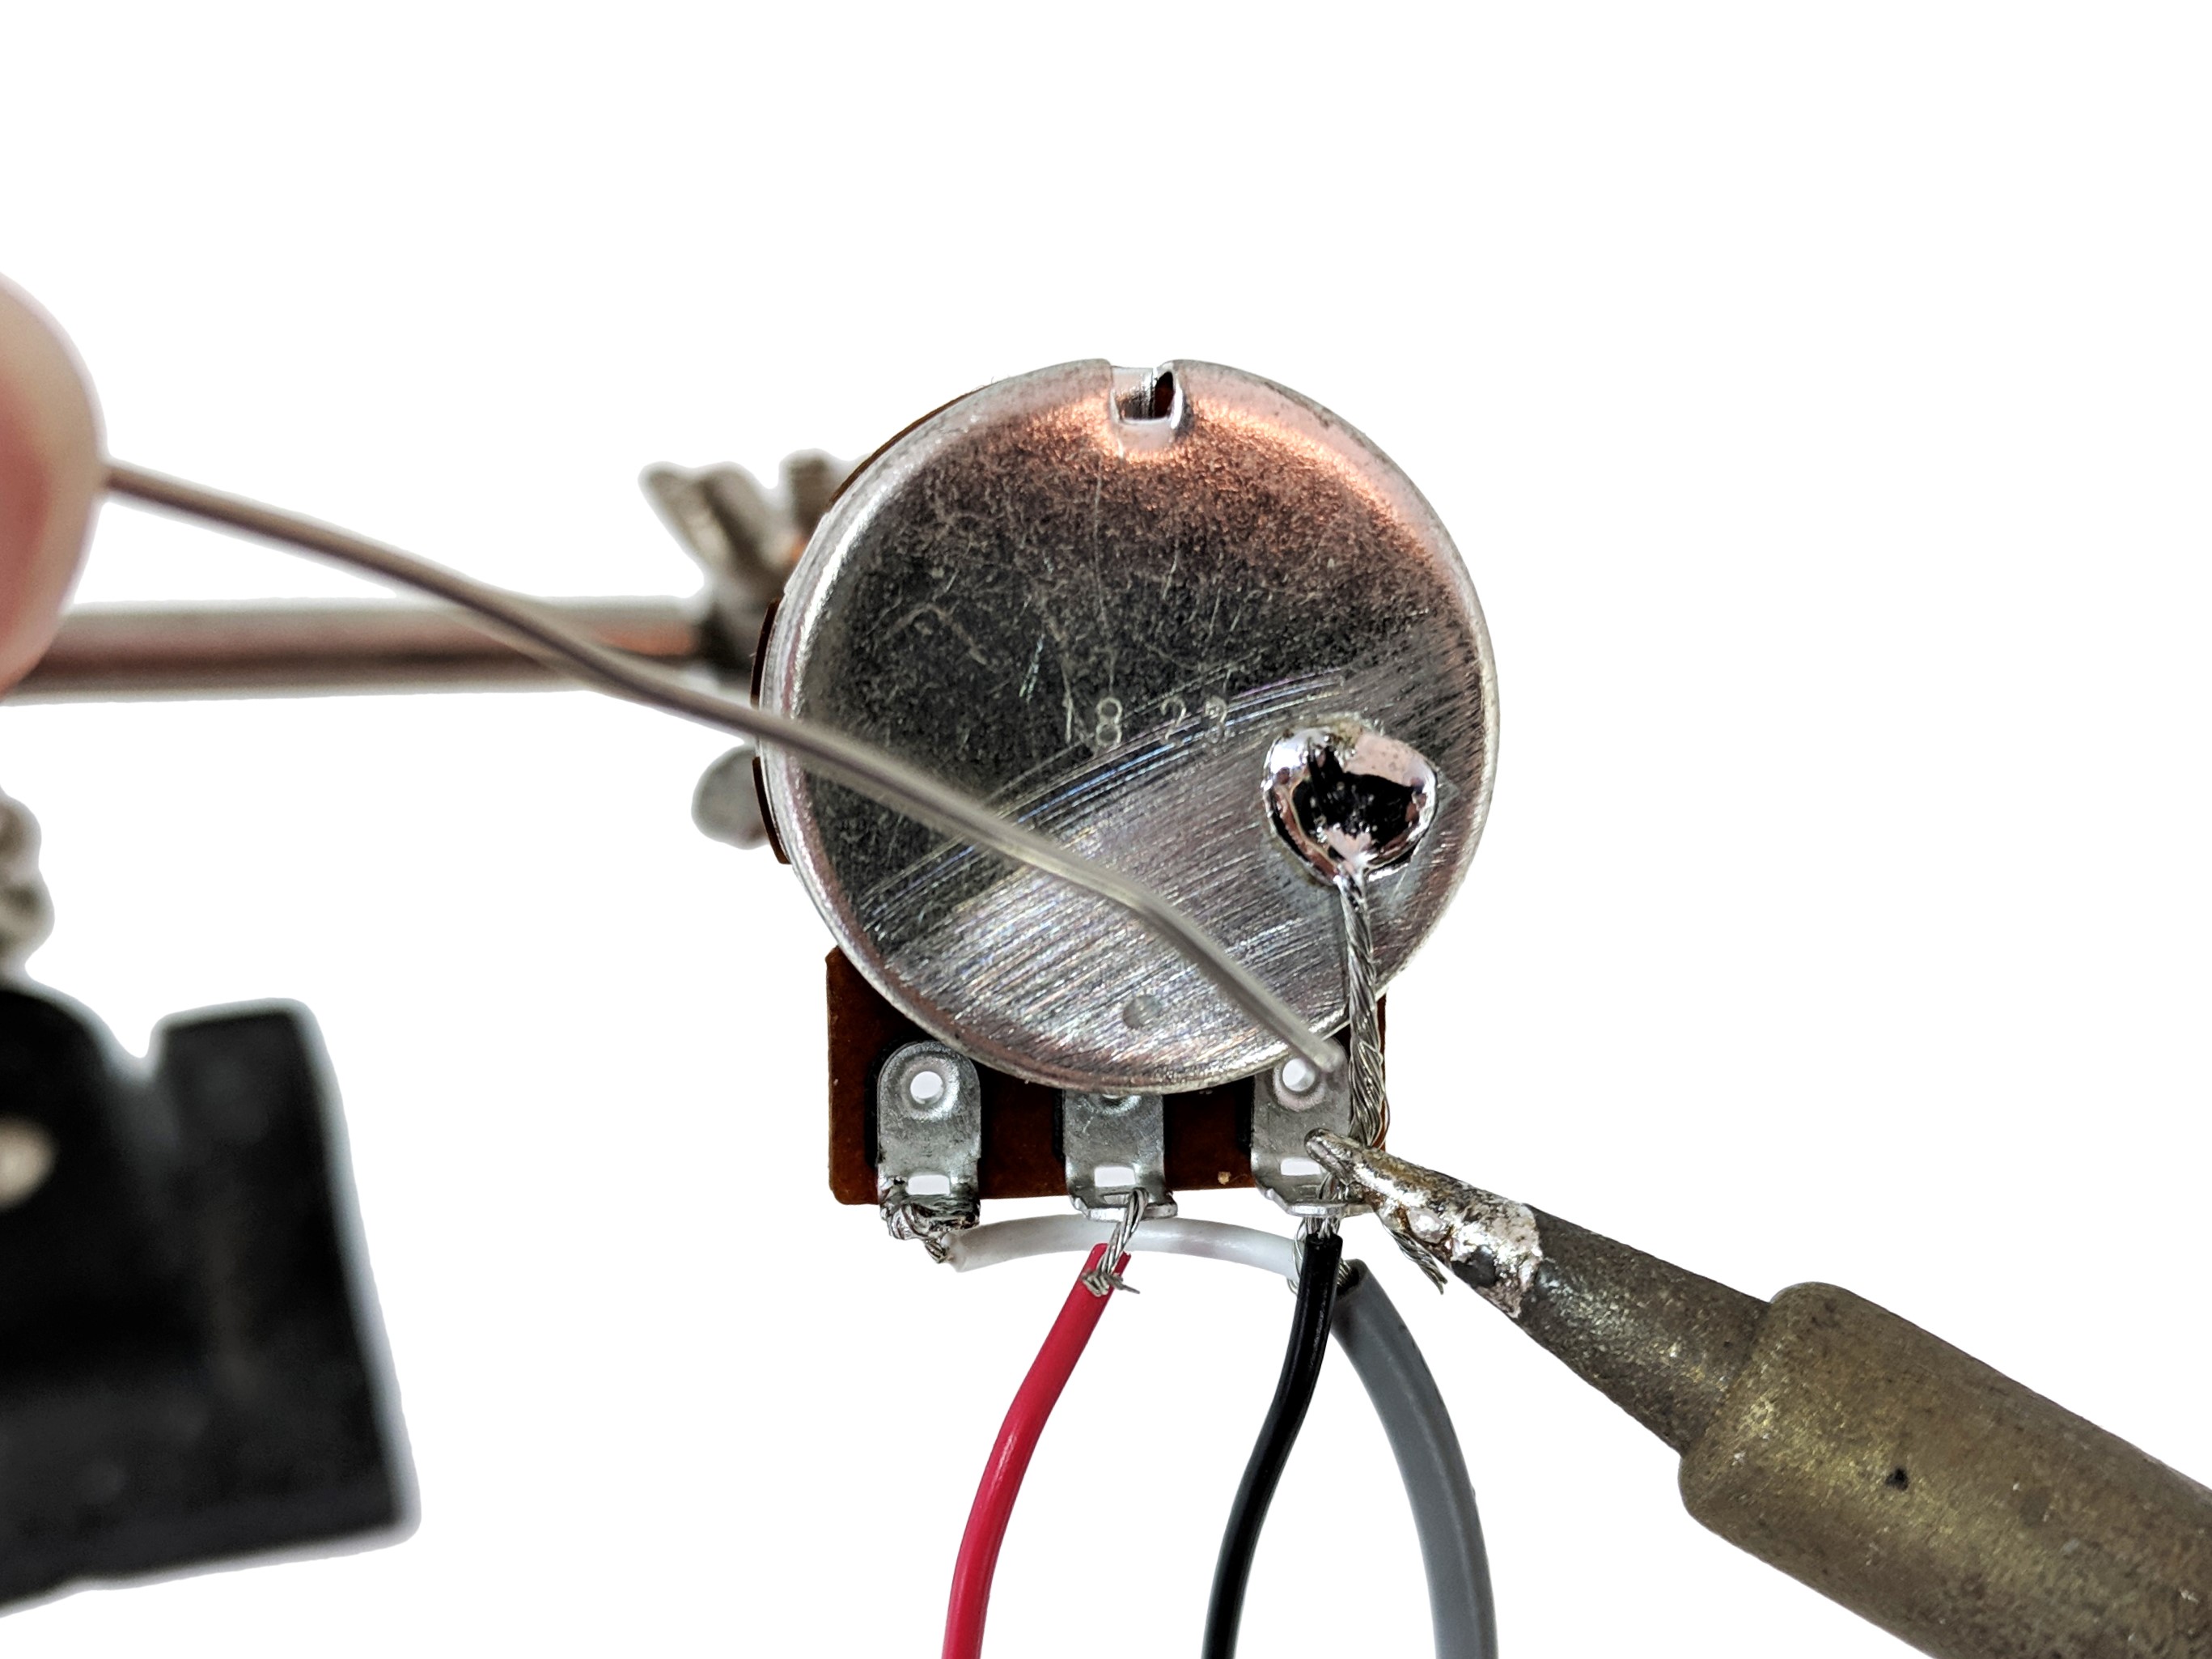 Grounding pickup wires to back of volume potentiometer